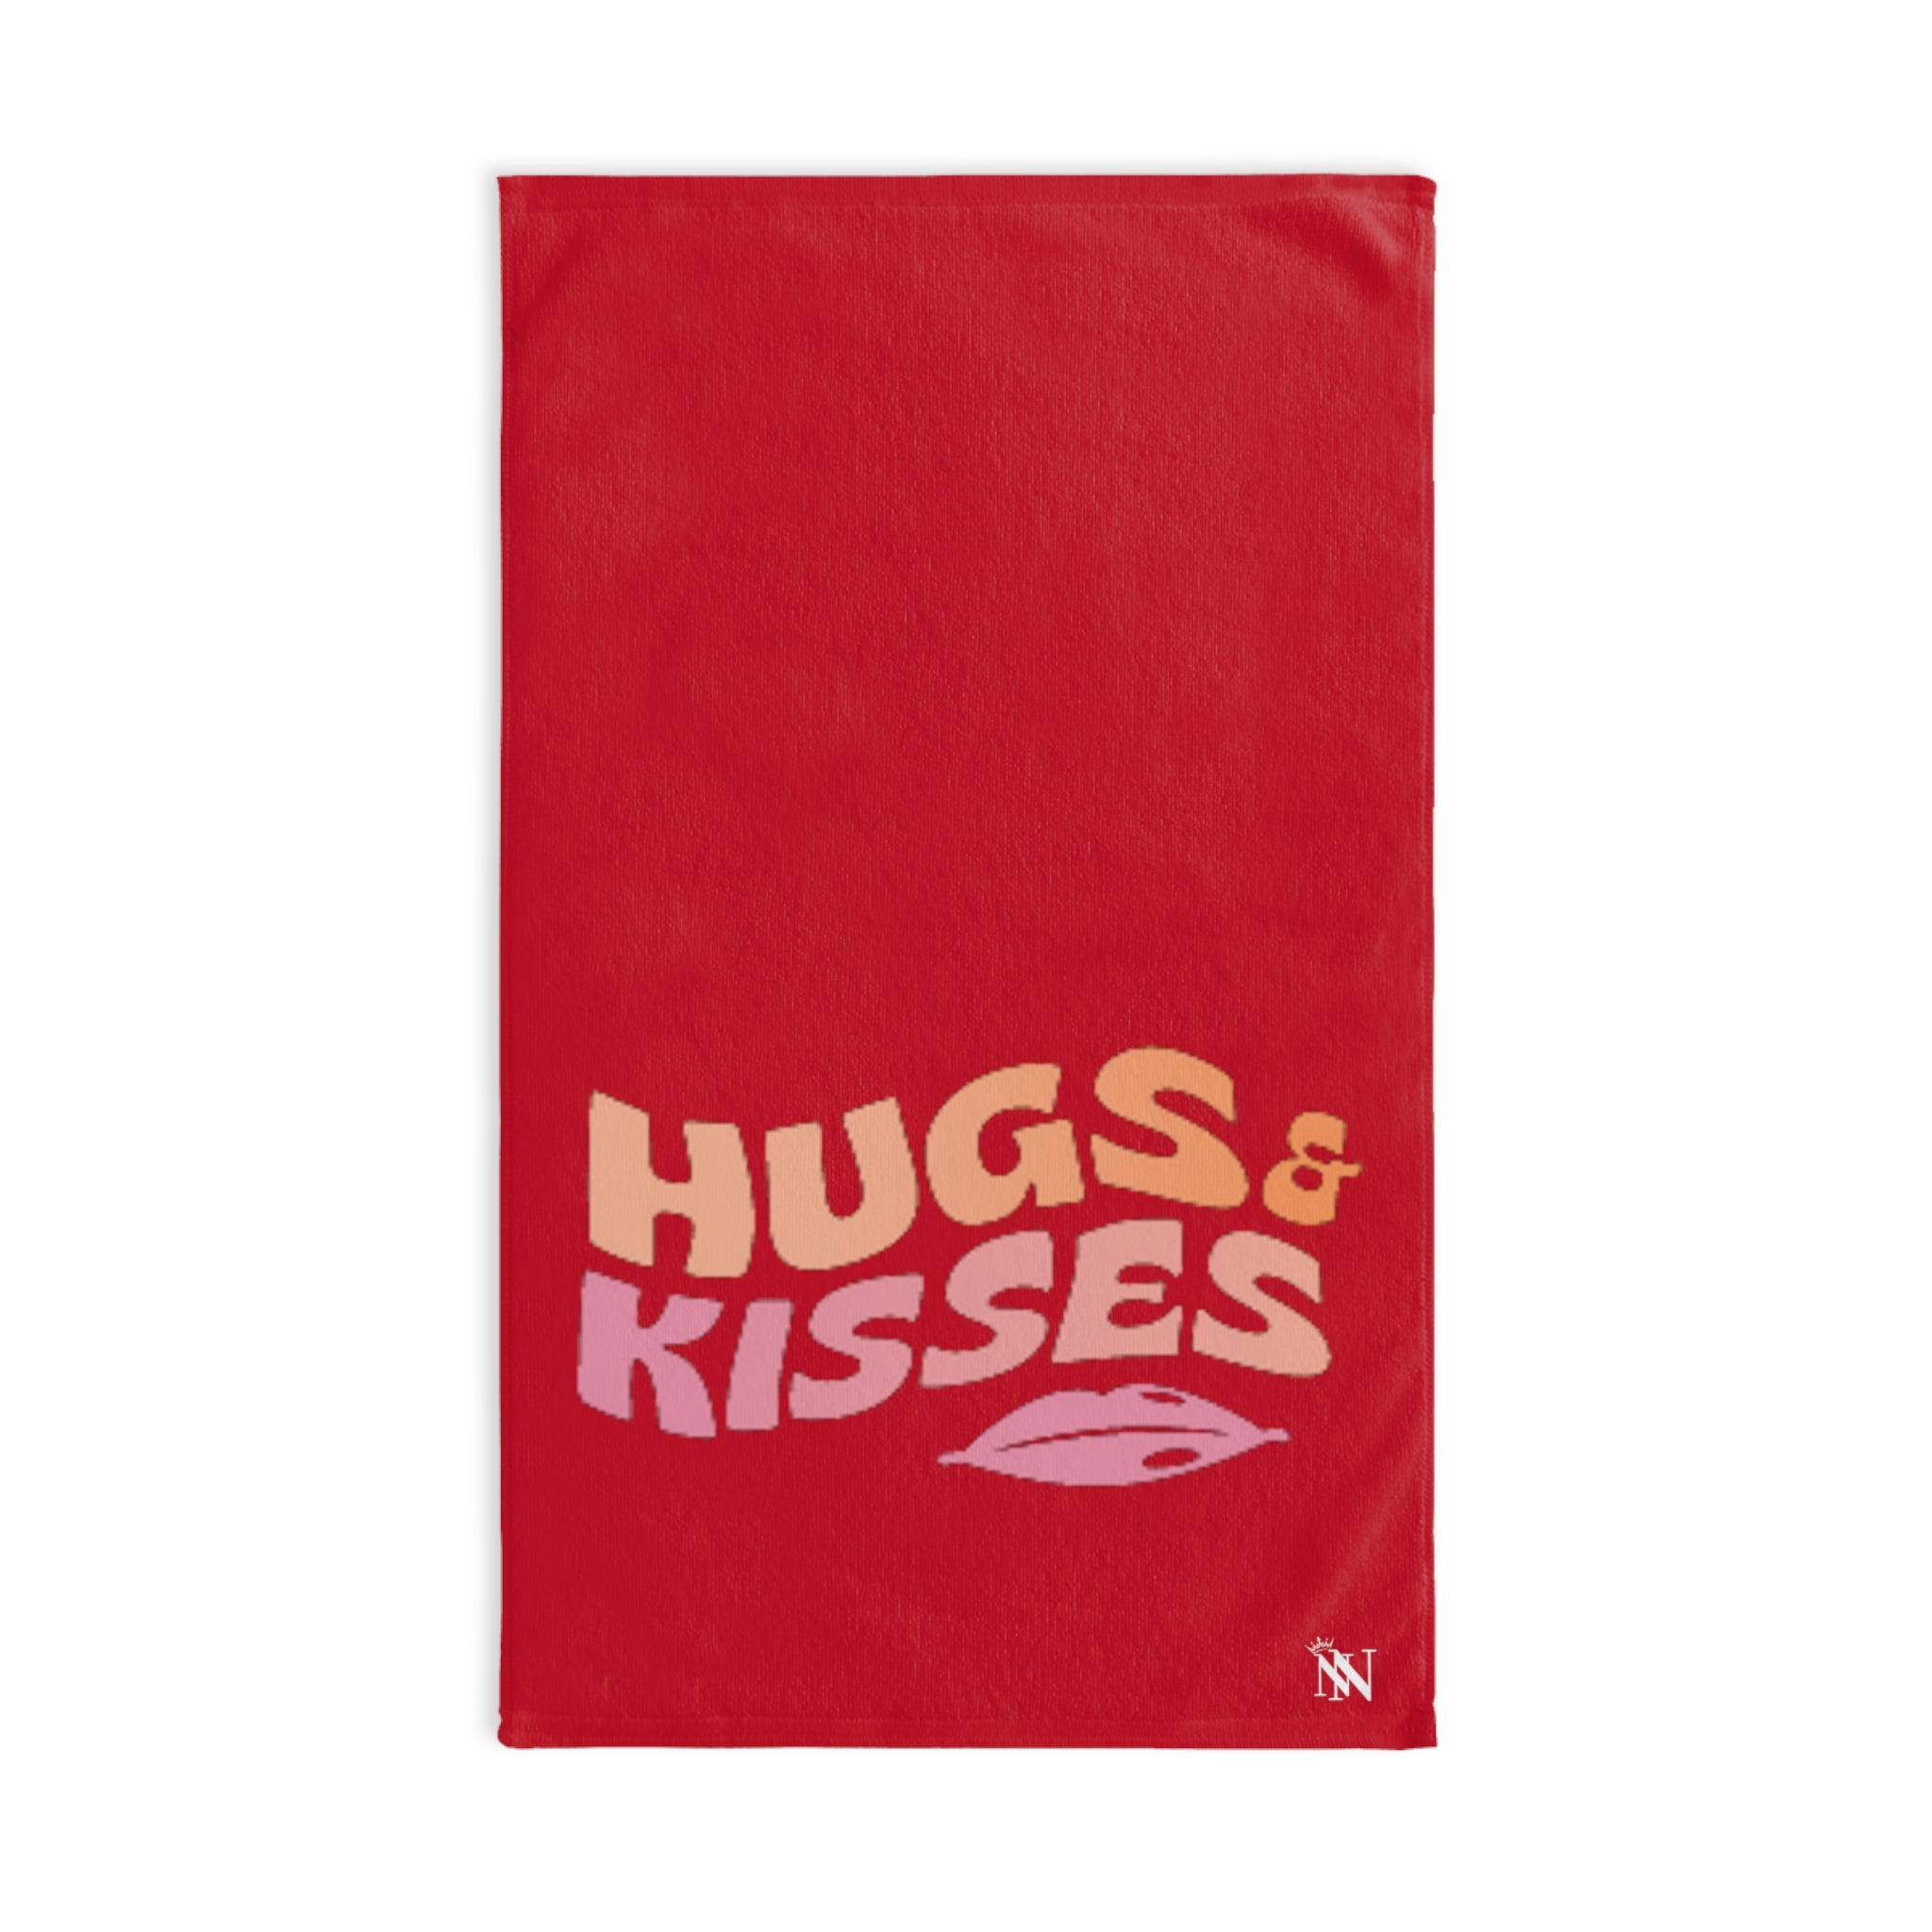 Hugs Kisses KissRed | Sexy Gifts for Boyfriend, Funny Towel Romantic Gift for Wedding Couple Fiance First Year 2nd Anniversary Valentines, Party Gag Gifts, Joke Humor Cloth for Husband Men BF NECTAR NAPKINS